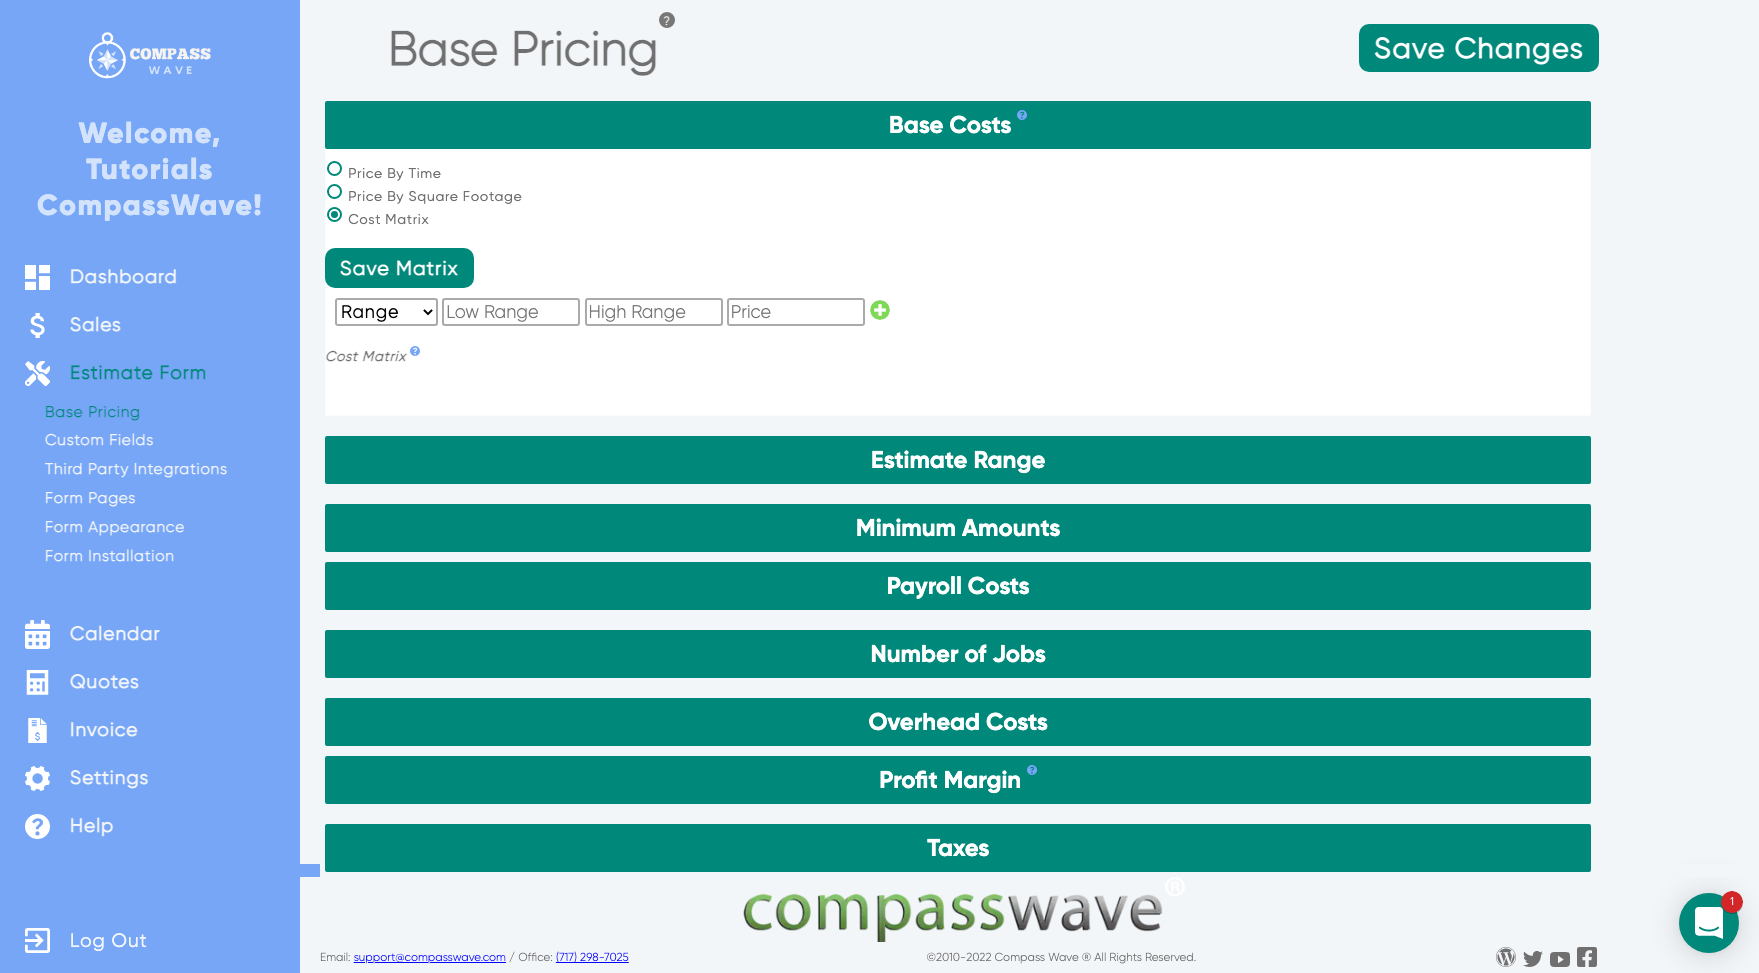 Base Pricing - This is where you can customize your base cost with Base SQFT, Time or even Cost Matrix.